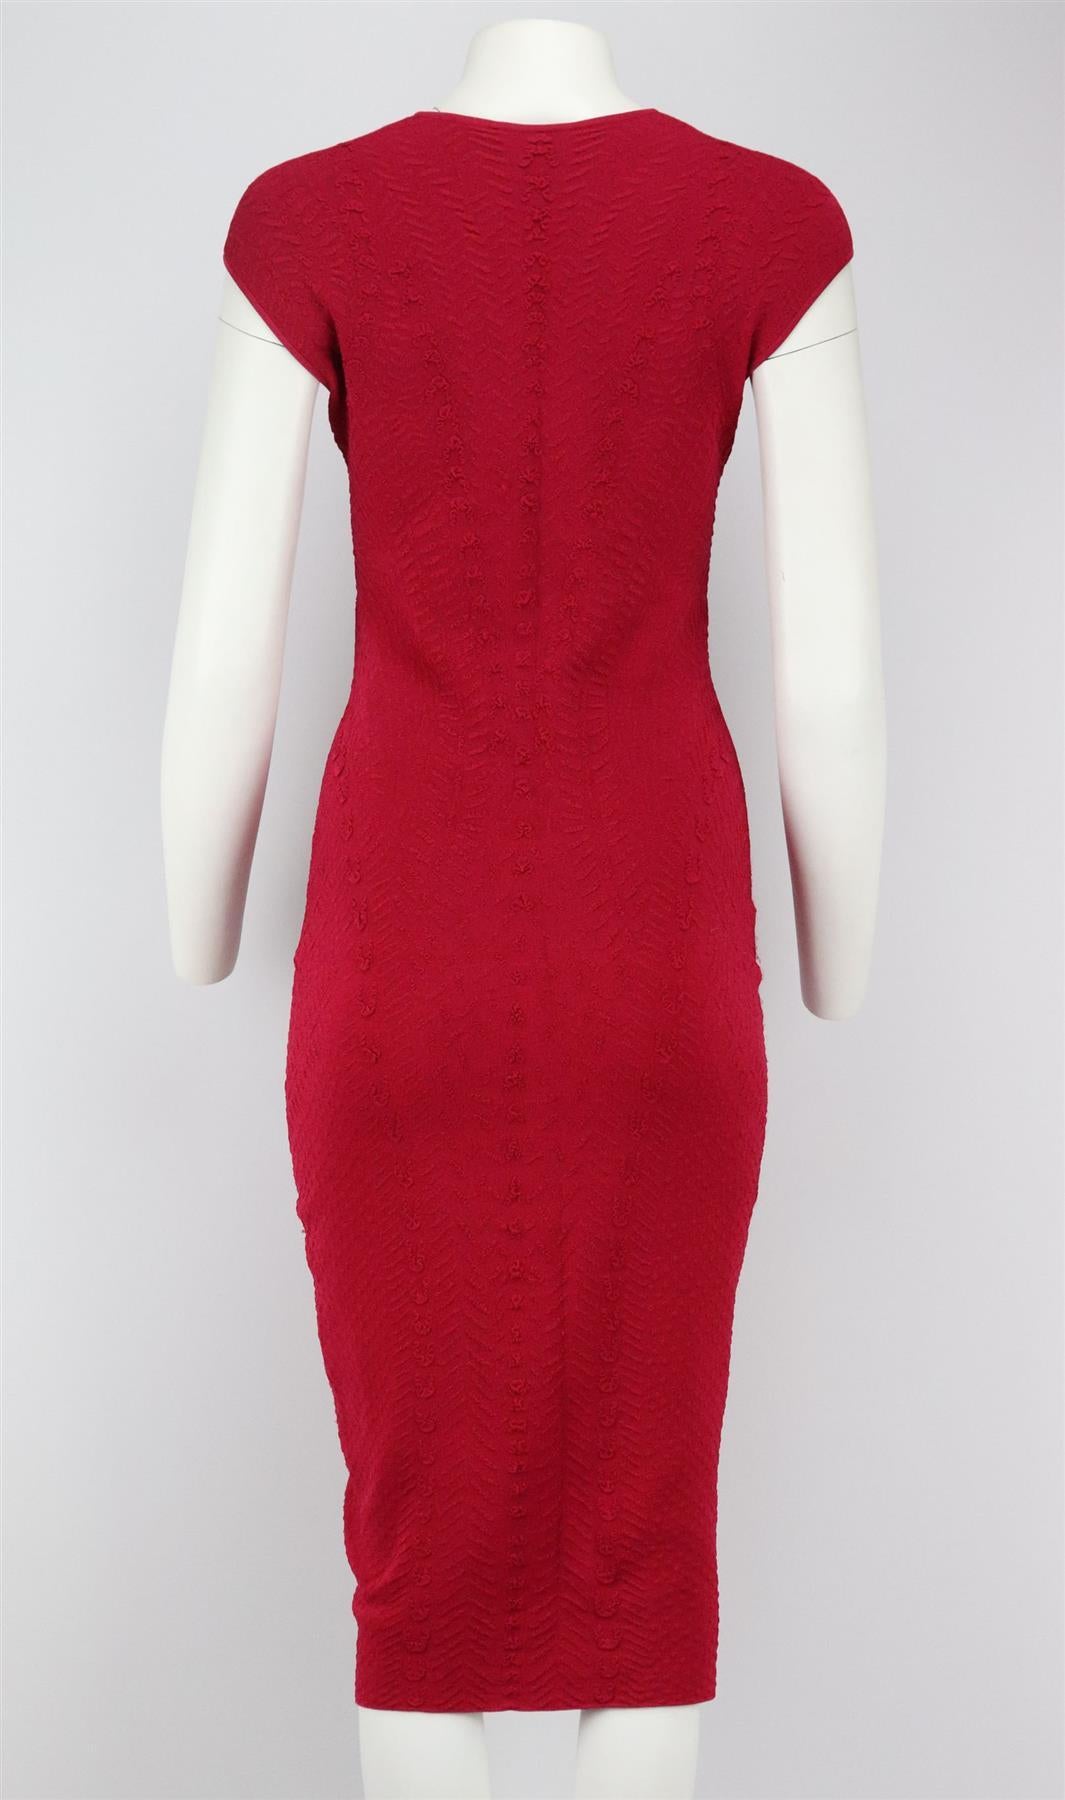 Work colour and texture into your new-season wardrobe with Alexander McQueen's red matelassé dress, this mid-weight stretch-knit style shapes and skims your figure and is woven with a raised floral pattern. Red matelassé stretch-knit. Slips on. 68%